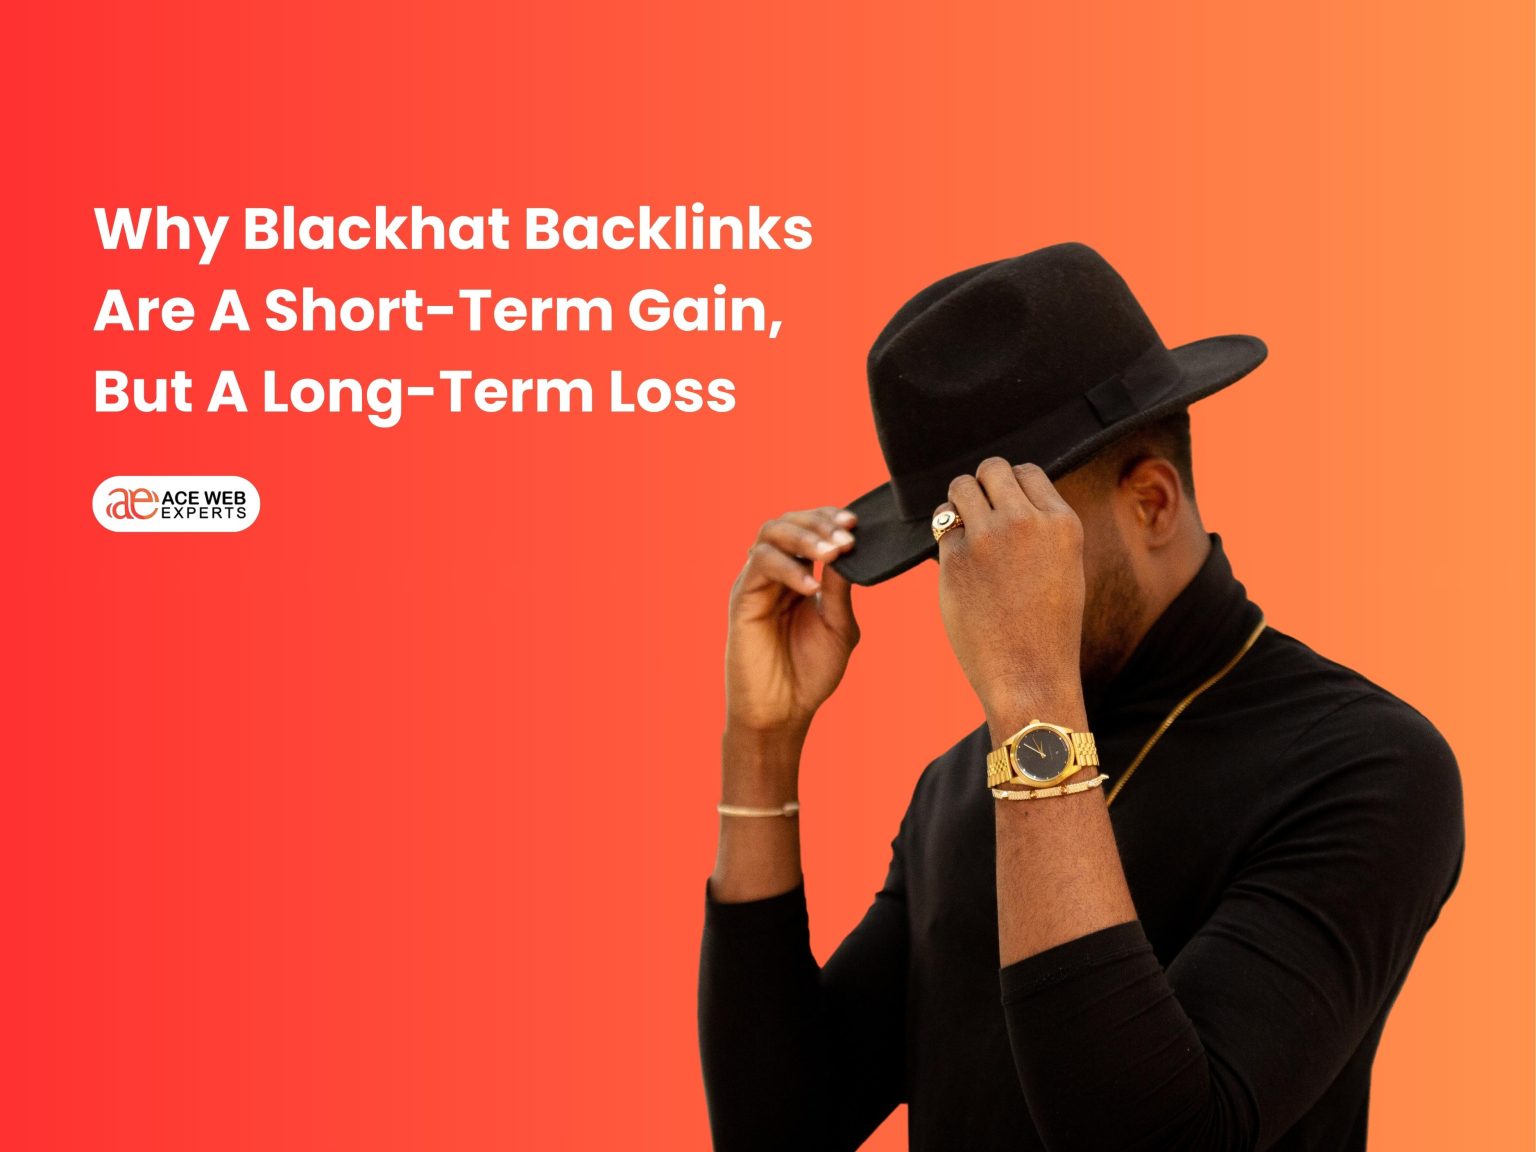 Why-Blackhat-Backlinks-Are-A-Short-Term-Gain-But-A-Long-Term-Loss